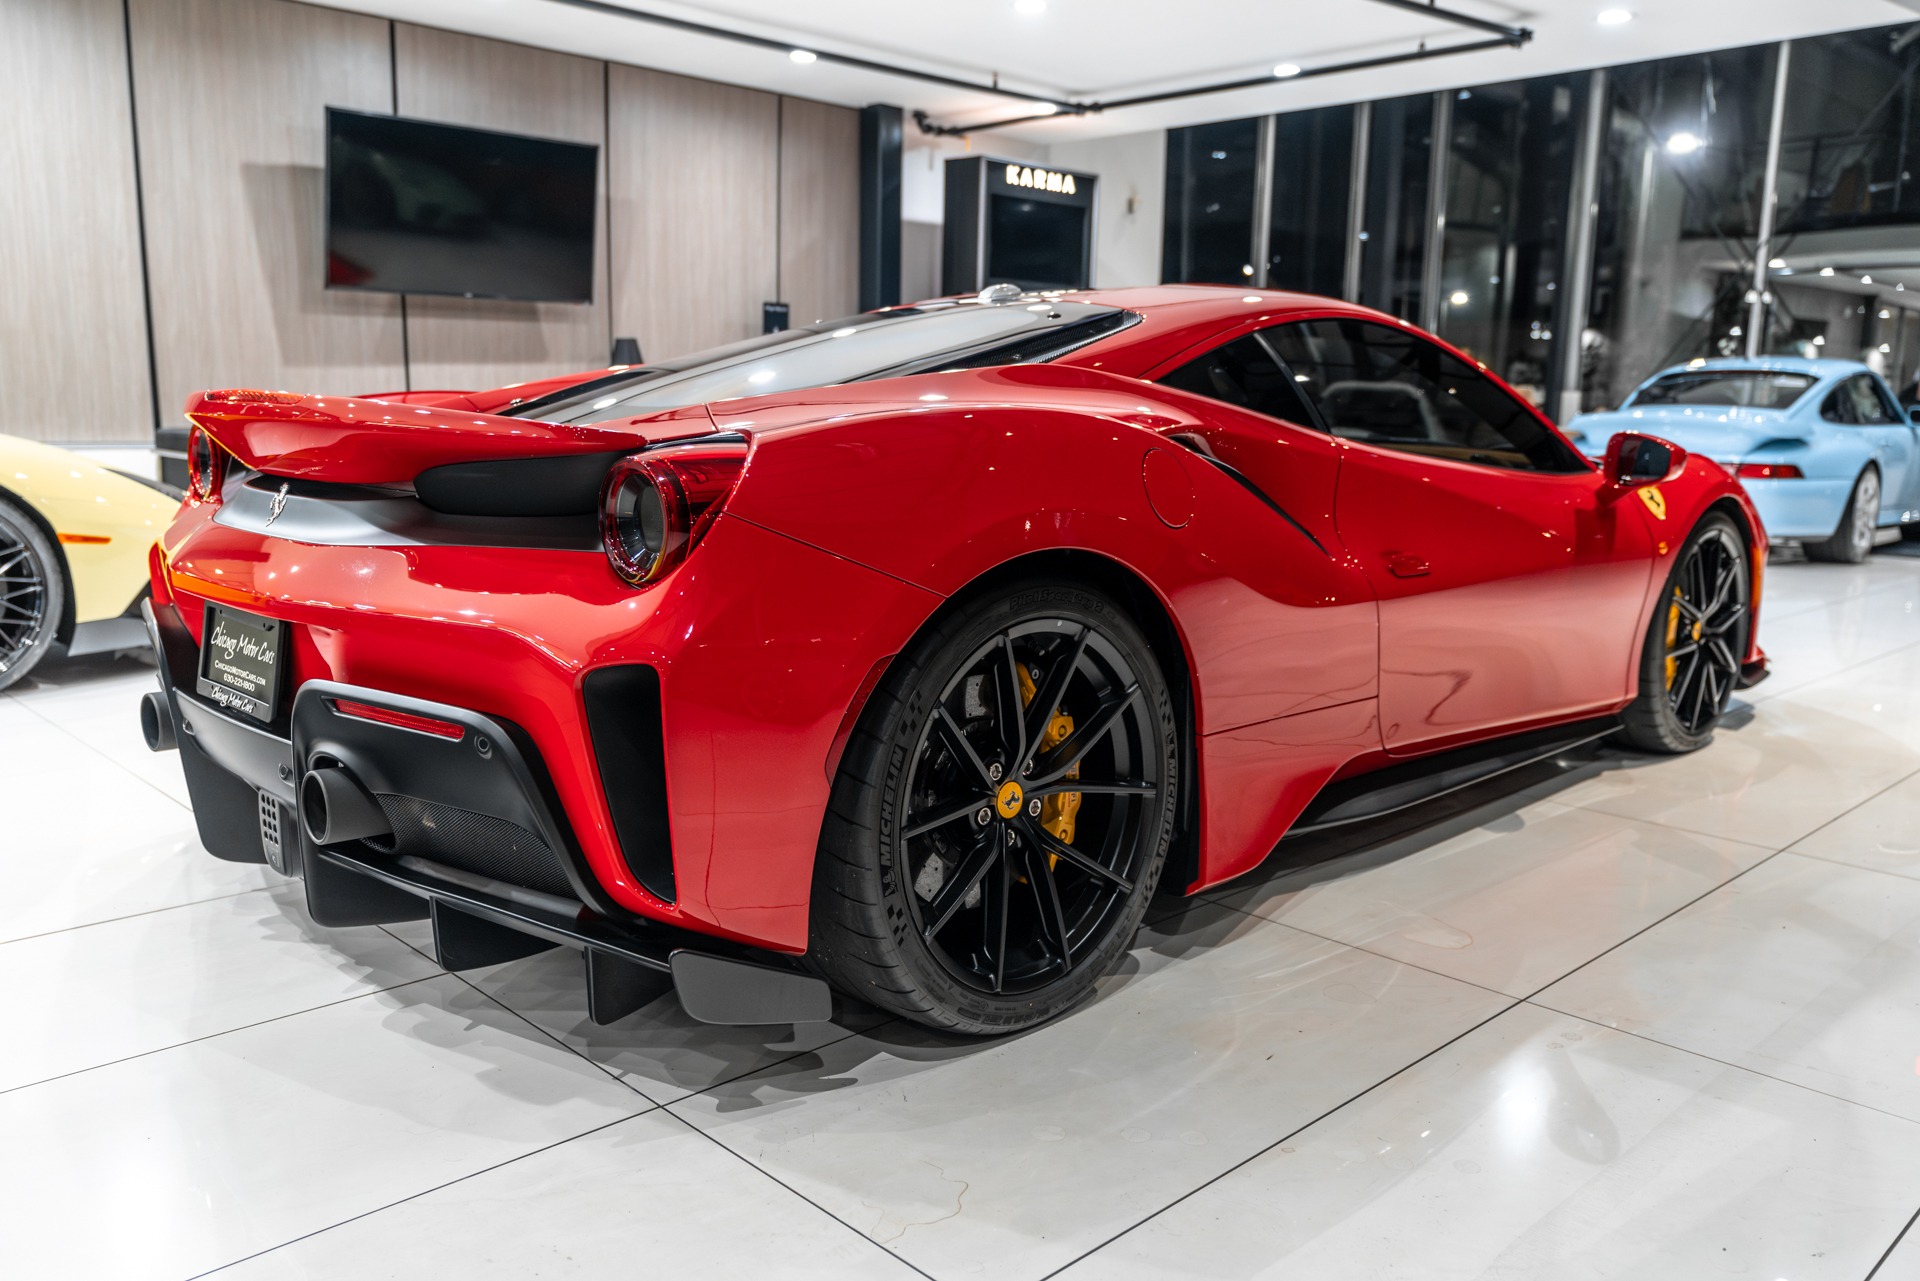 Used-2020-Ferrari-488-Pista-Coupe-LOW-Miles-FULL-PPF-Two-Tone-Stripe-Carbon-Racing-Seats